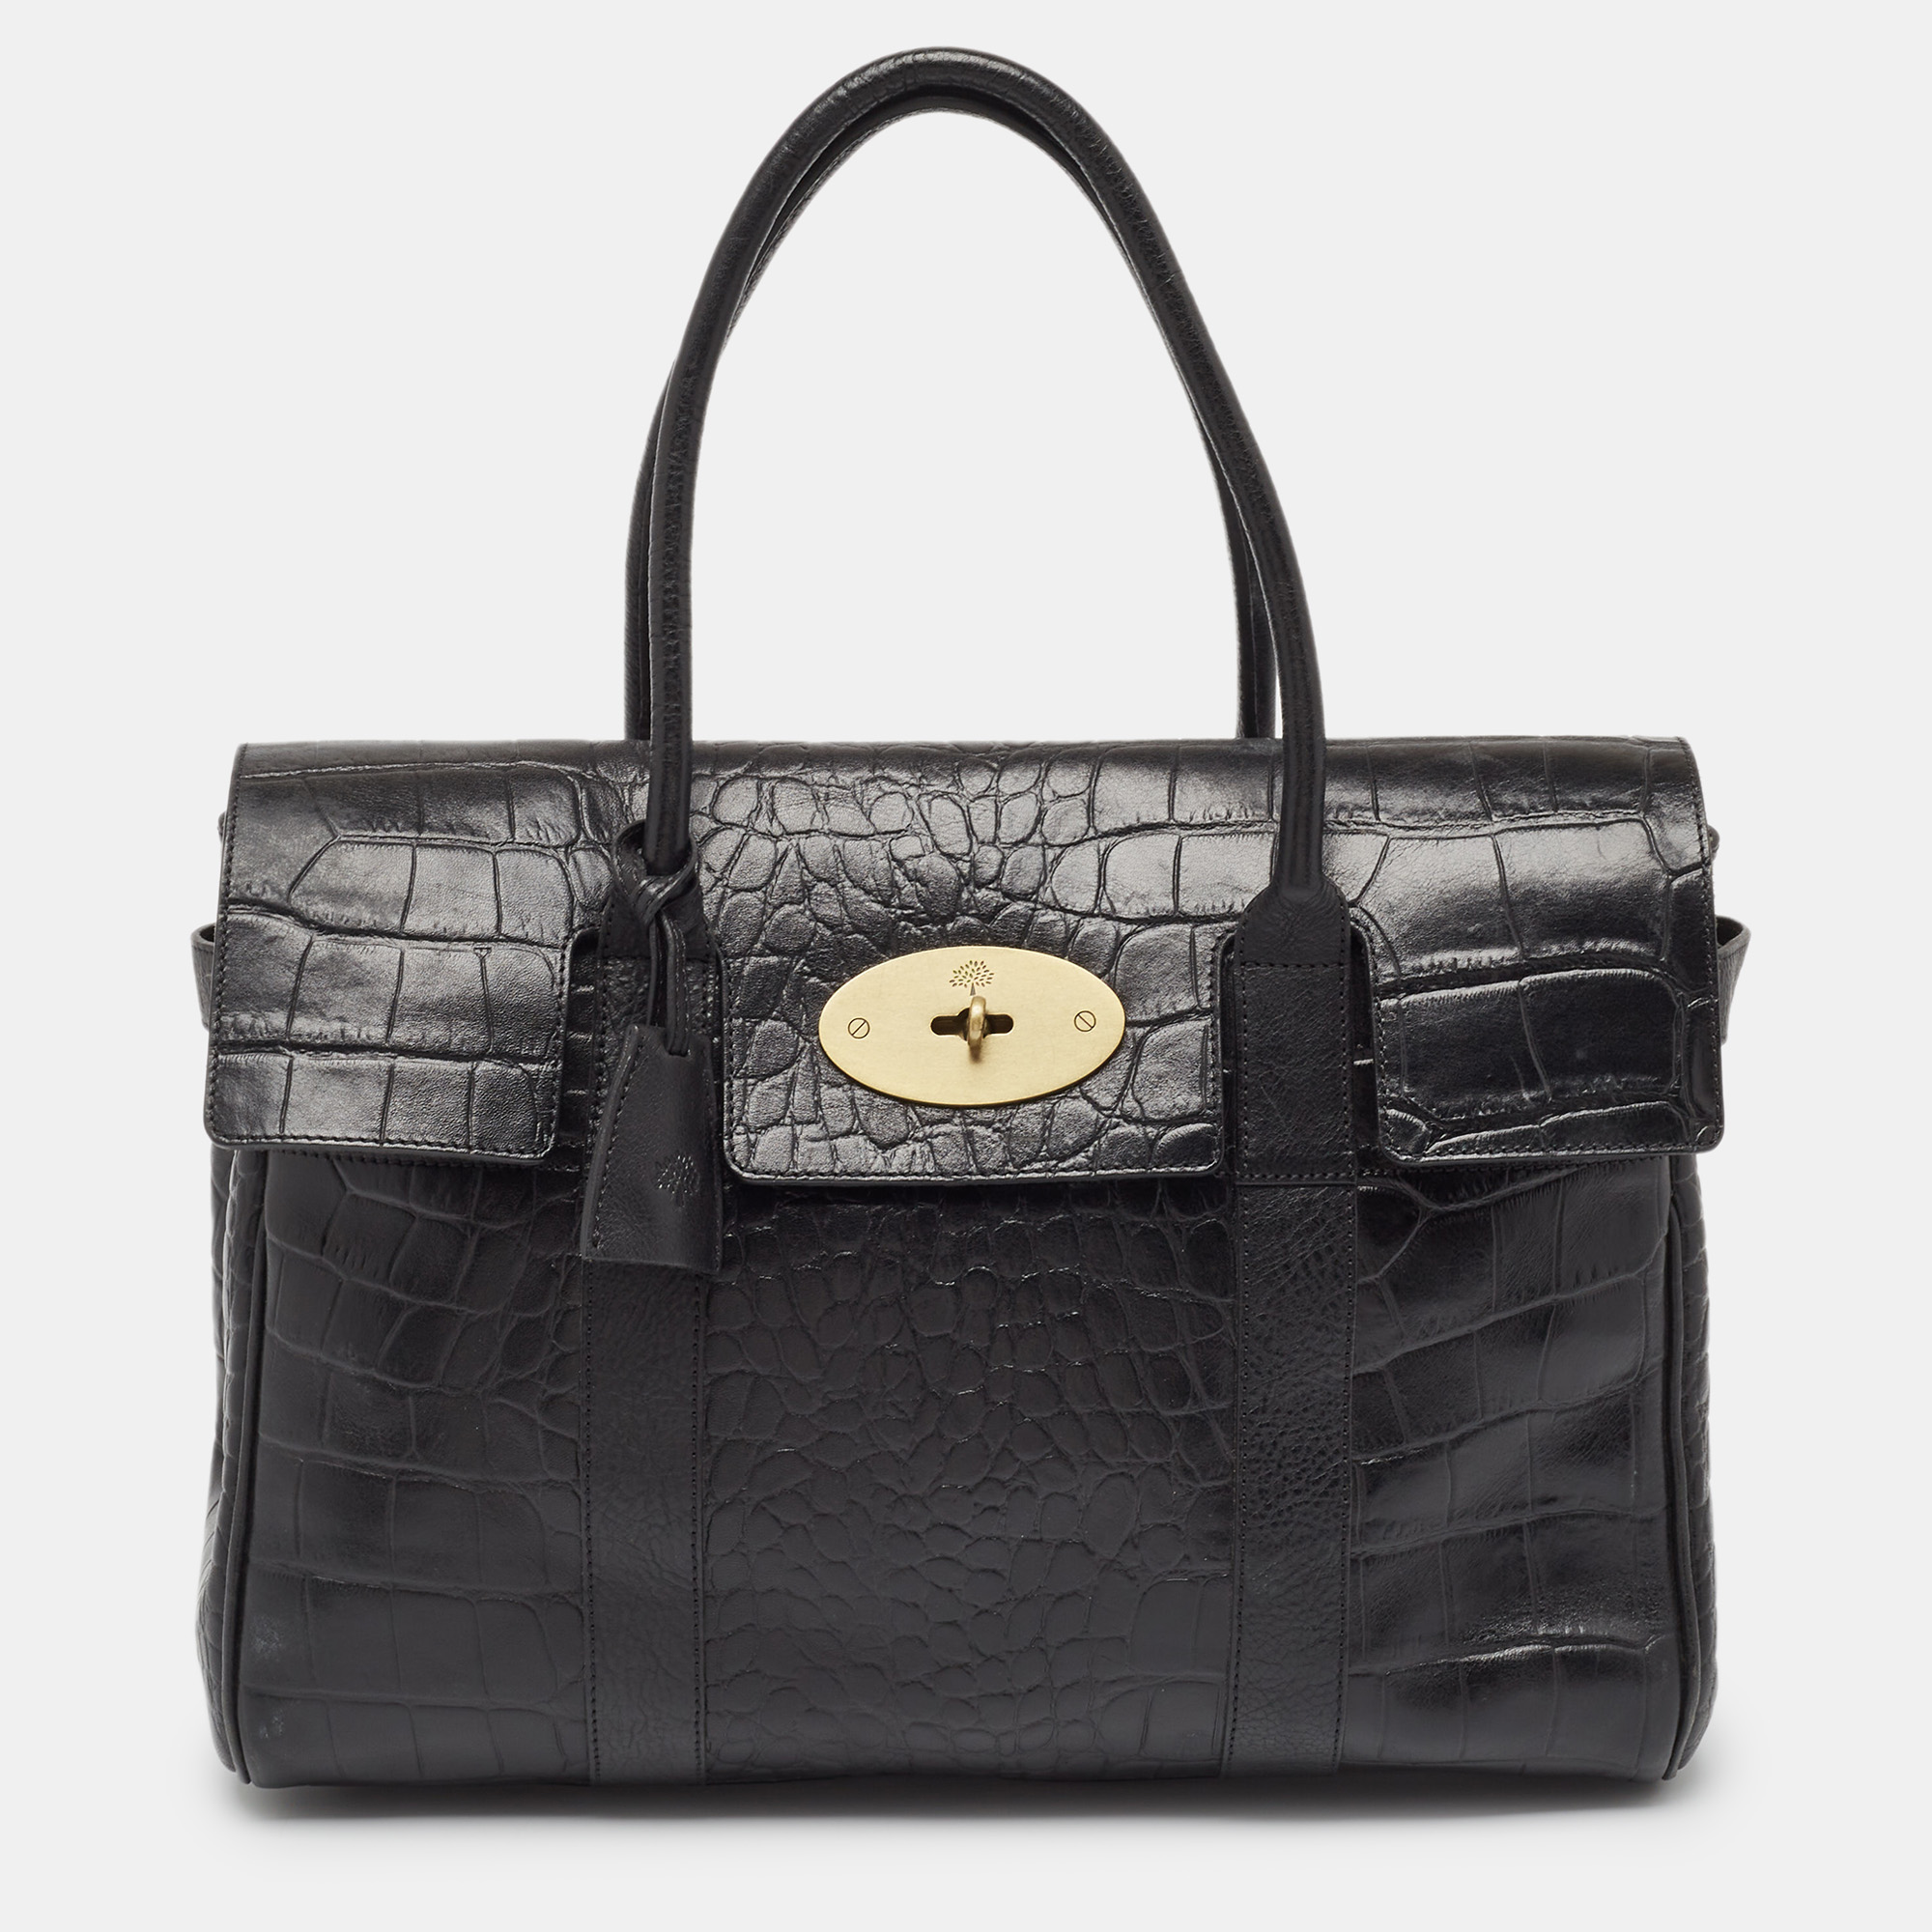 Mulberry black croc embossed leather bayswater satchel